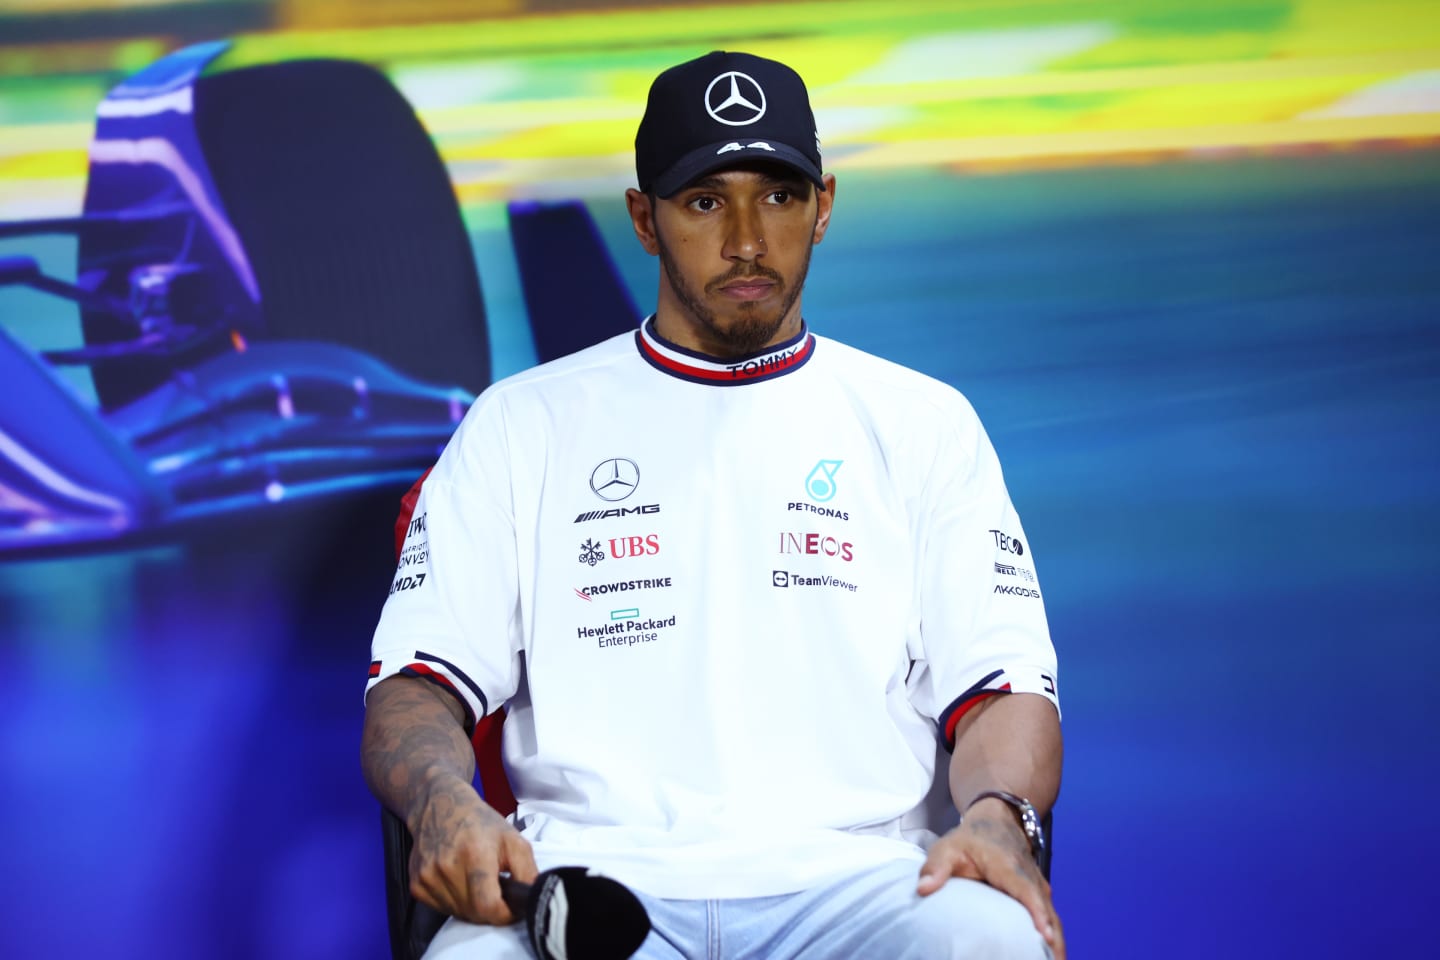 SAO PAULO, BRAZIL - NOVEMBER 12: Third placed Lewis Hamilton of Great Britain and Mercedes talks in a press conference after the Sprint ahead of the F1 Grand Prix of Brazil at Autodromo Jose Carlos Pace on November 12, 2022 in Sao Paulo, Brazil. (Photo by Dan Istitene/Getty Images)